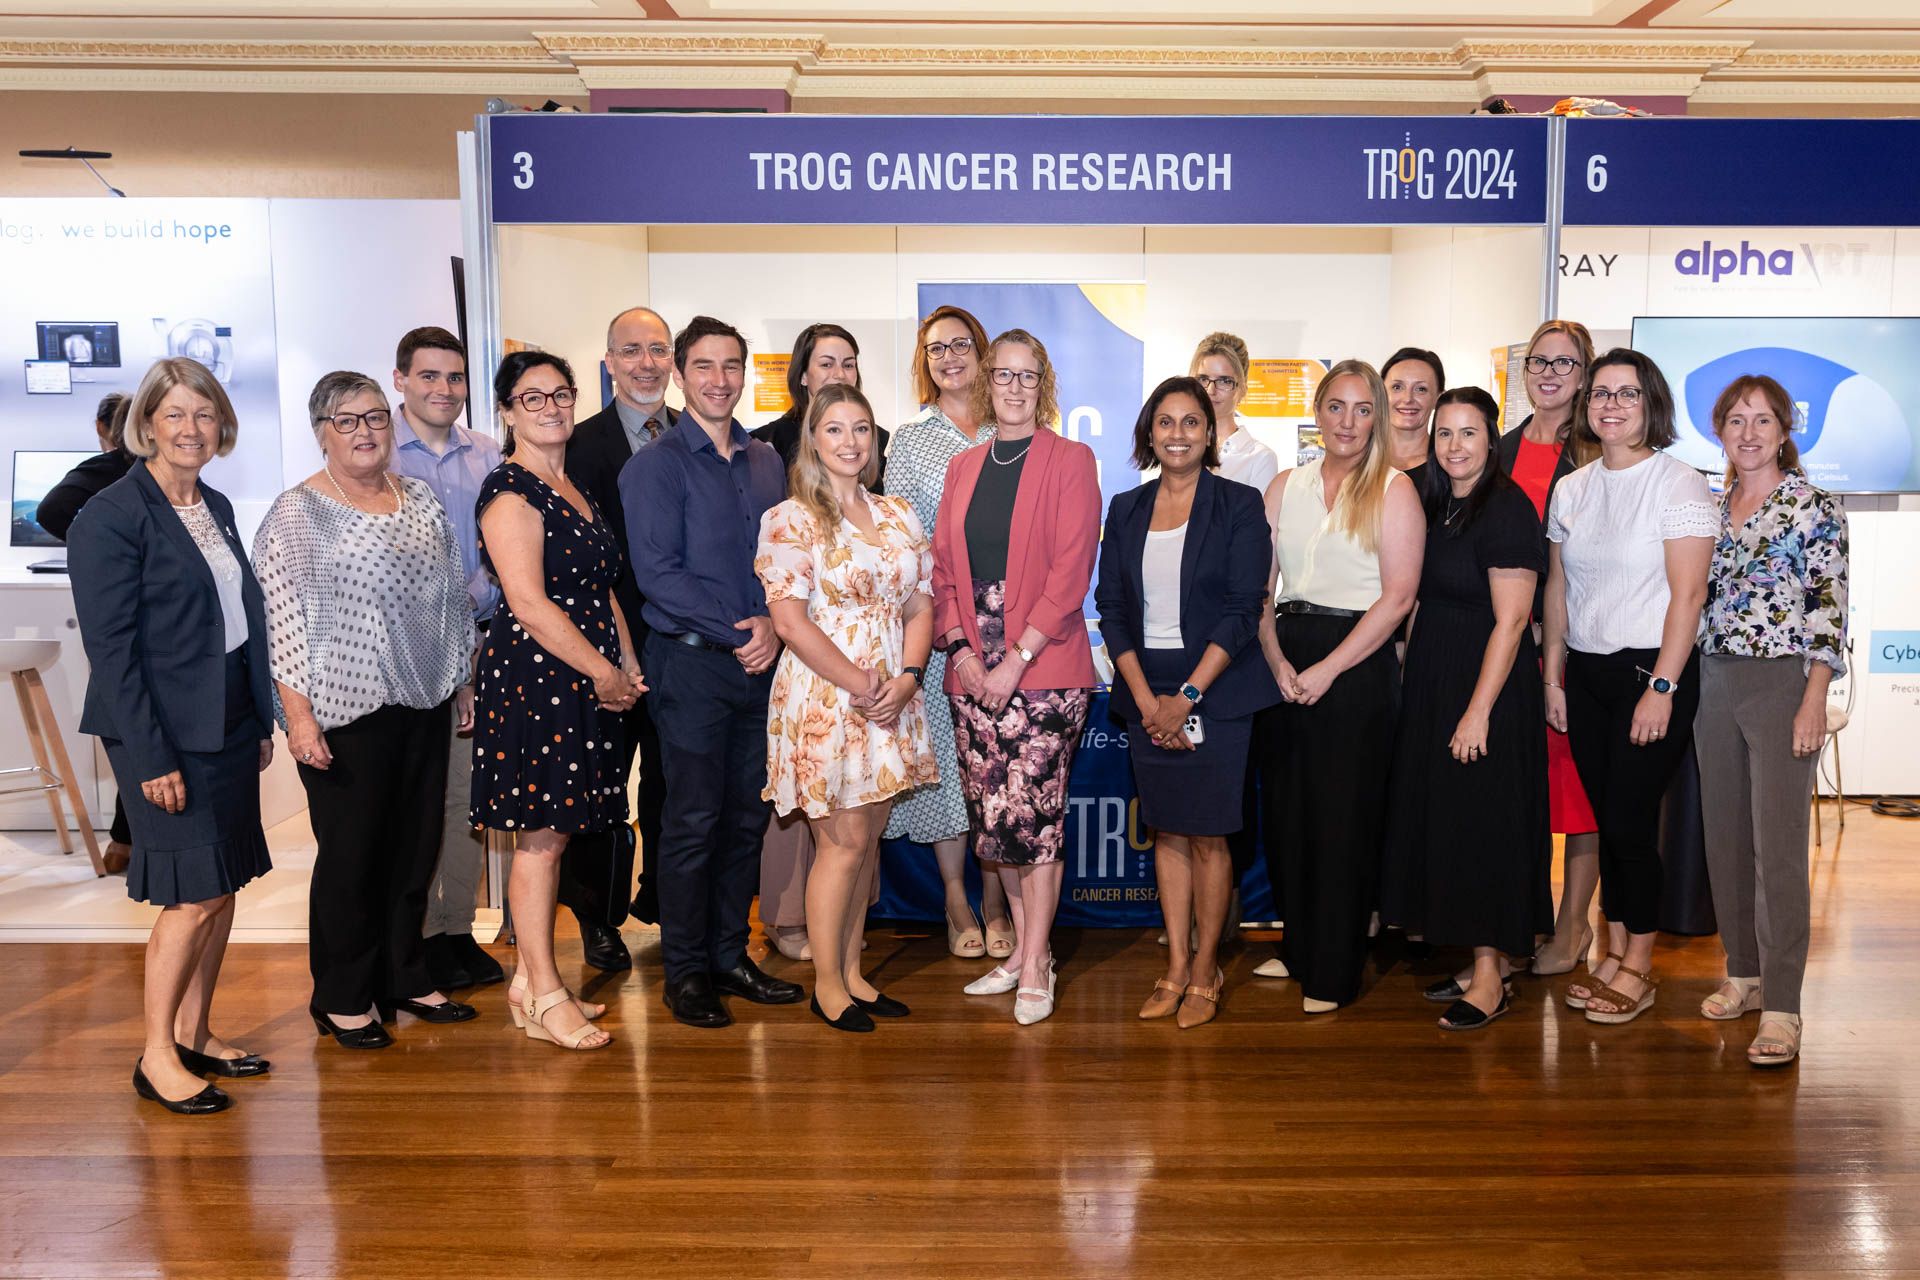 Radiation Therapist, Our People, TROG Cancer Research